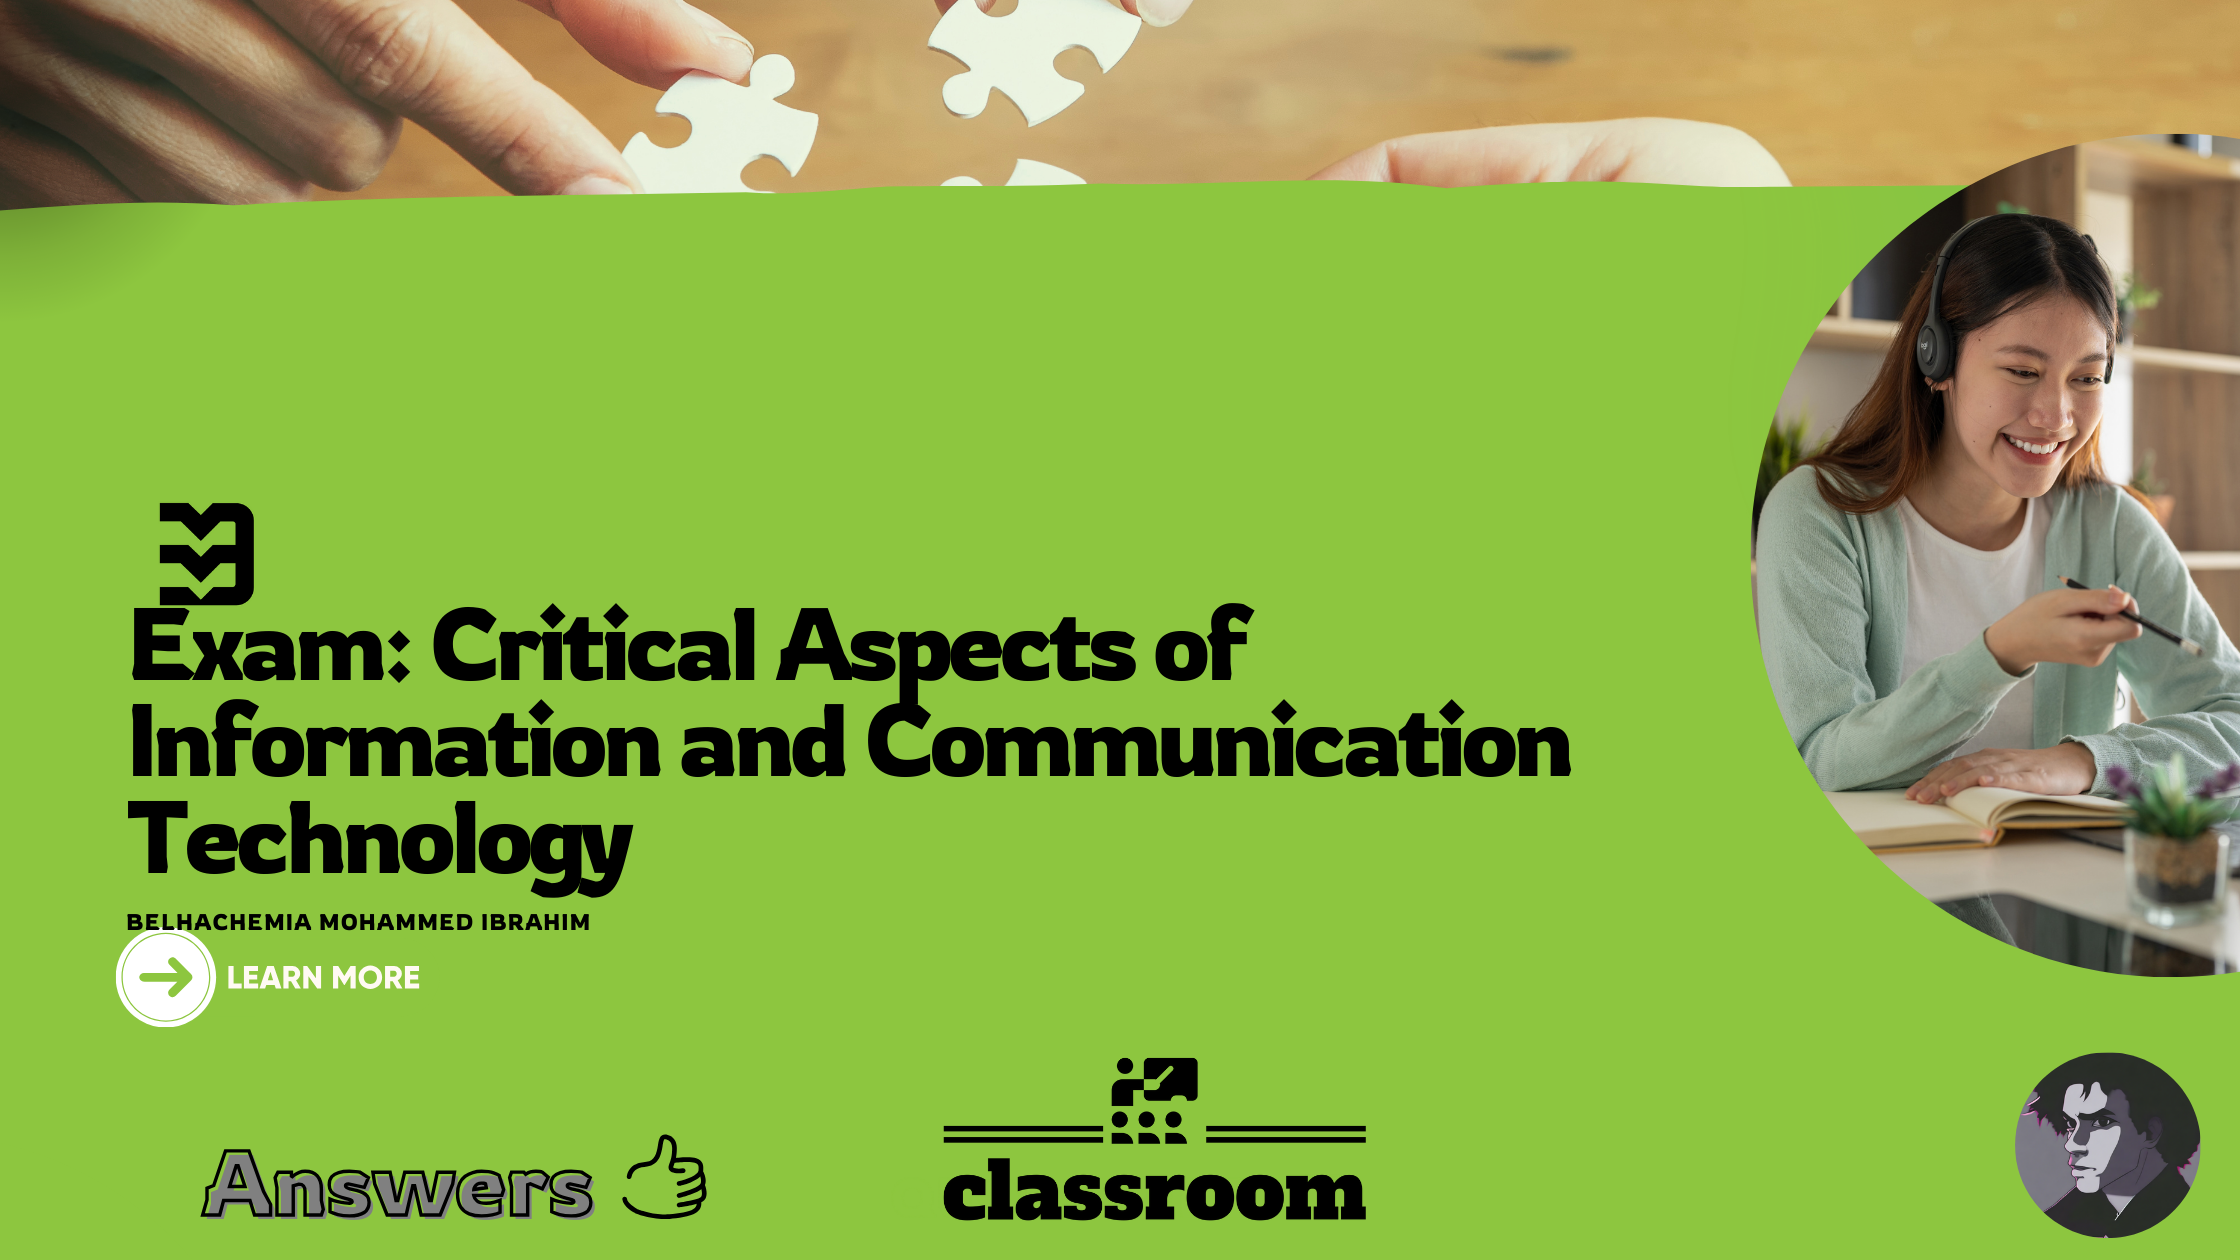 Exam: Critical Aspects of Information and Communication Technology